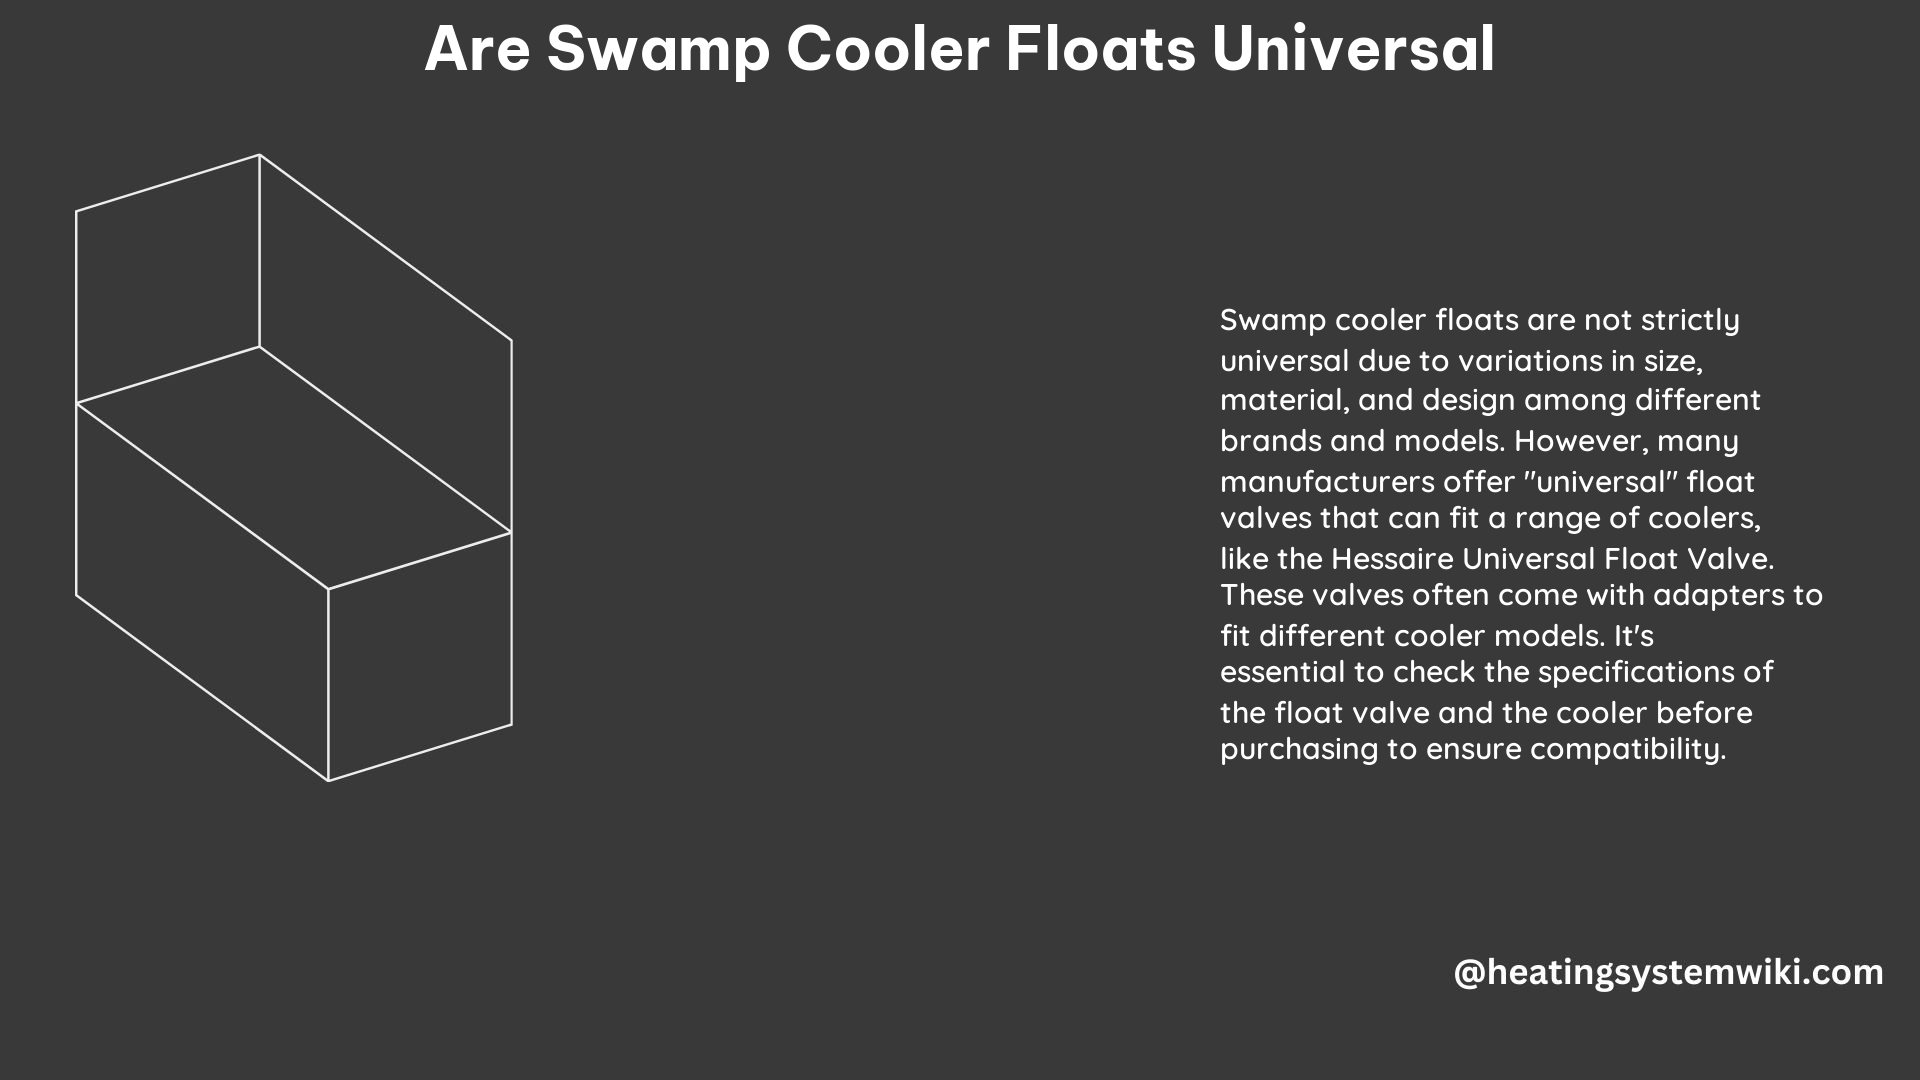 Are Swamp Cooler Floats Universal